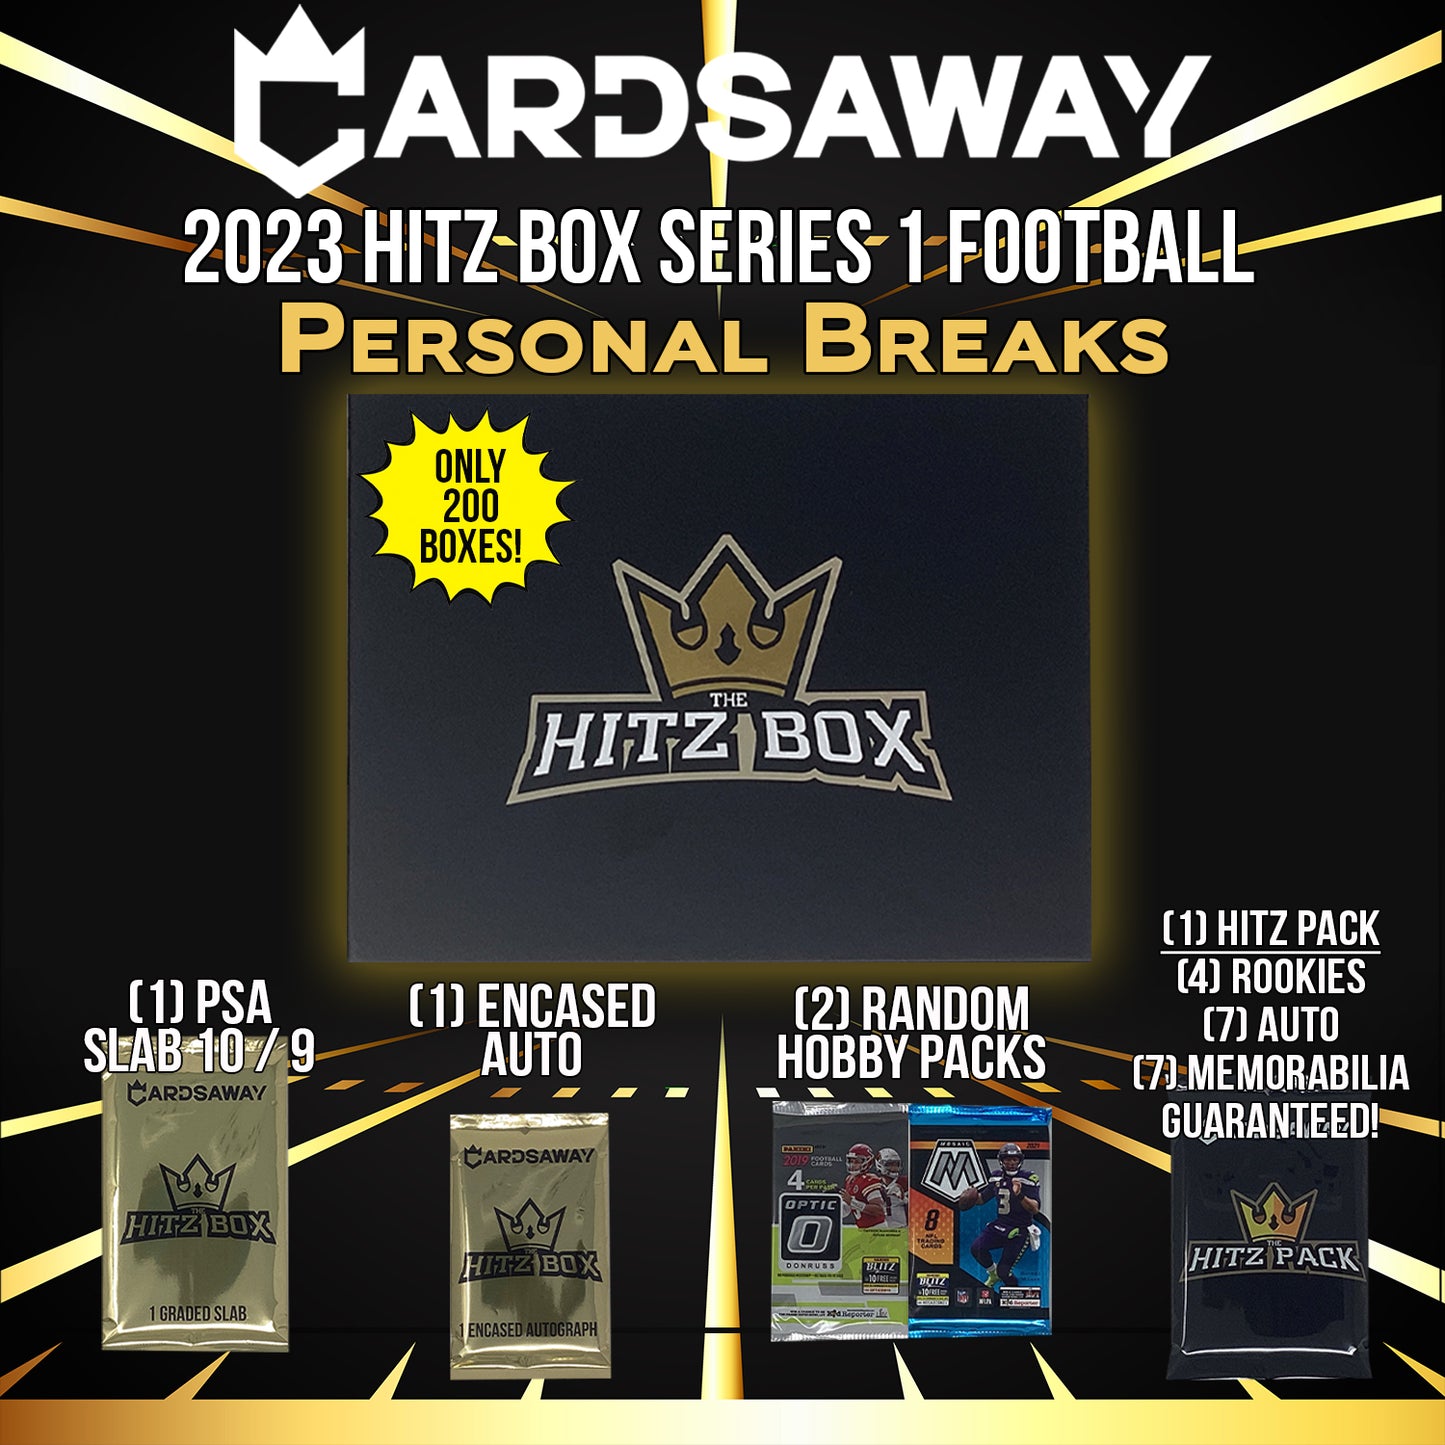 2023 Hitz Box Series 1 Football - PERSONAL BREAK (GIFT CARDS EXCLUDED)